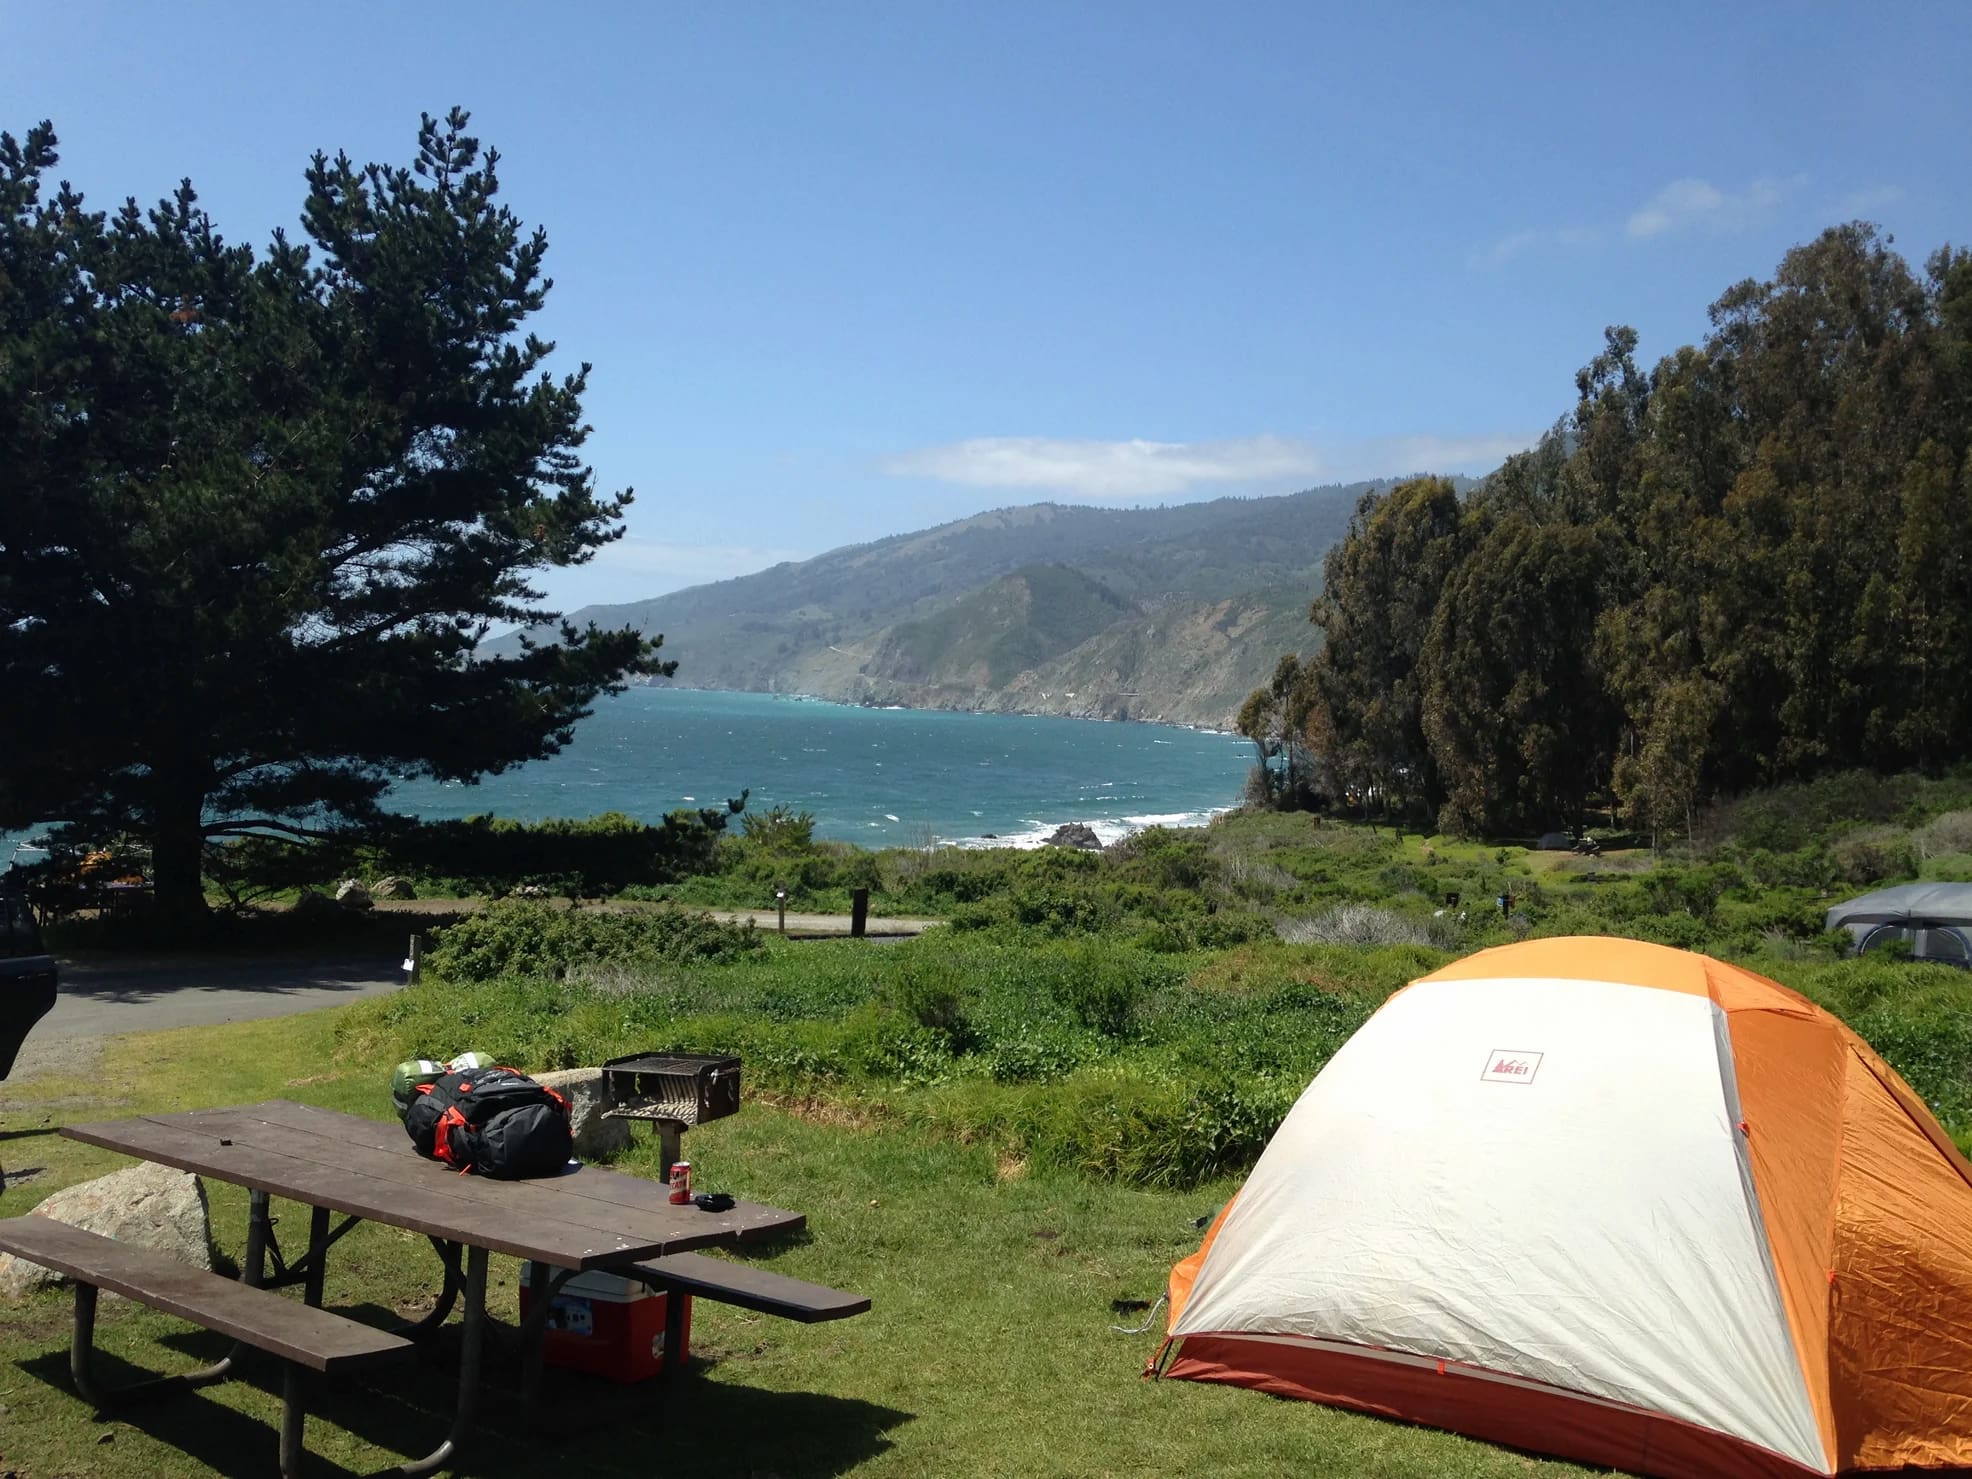 Orange tent at grass covered campsite with picnic table overlooking the Pacific coast and blue ocean down below.